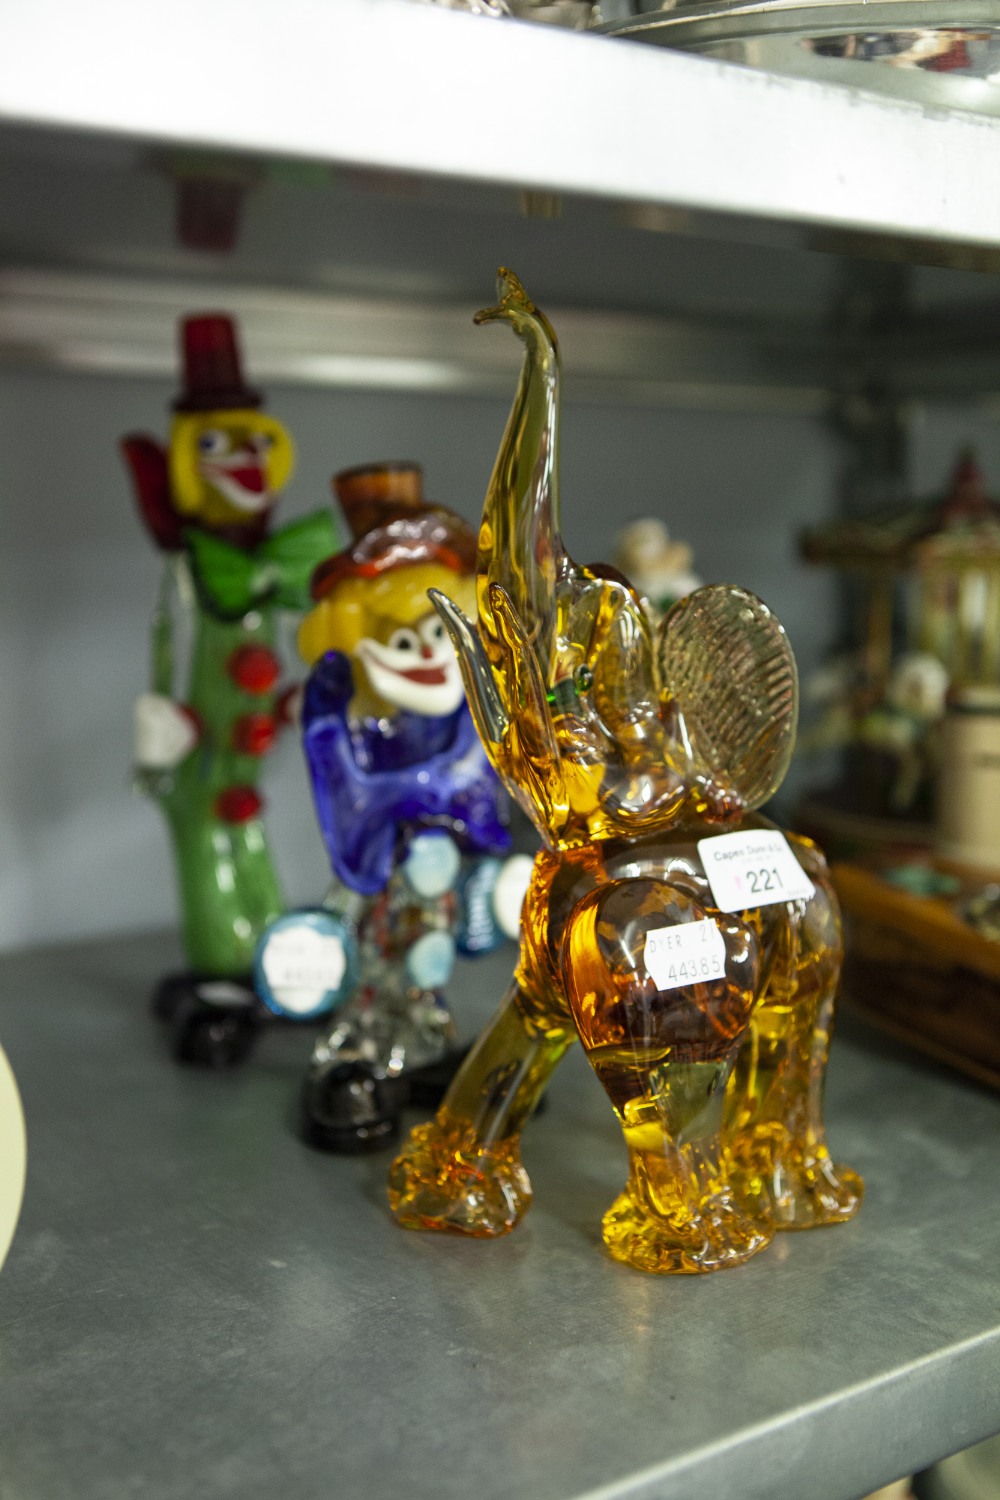 TWO COLOURED GLASS FIGURES OF CLOWNS AND A PINK GLASS ELEPHANT ORNAMENT (3)